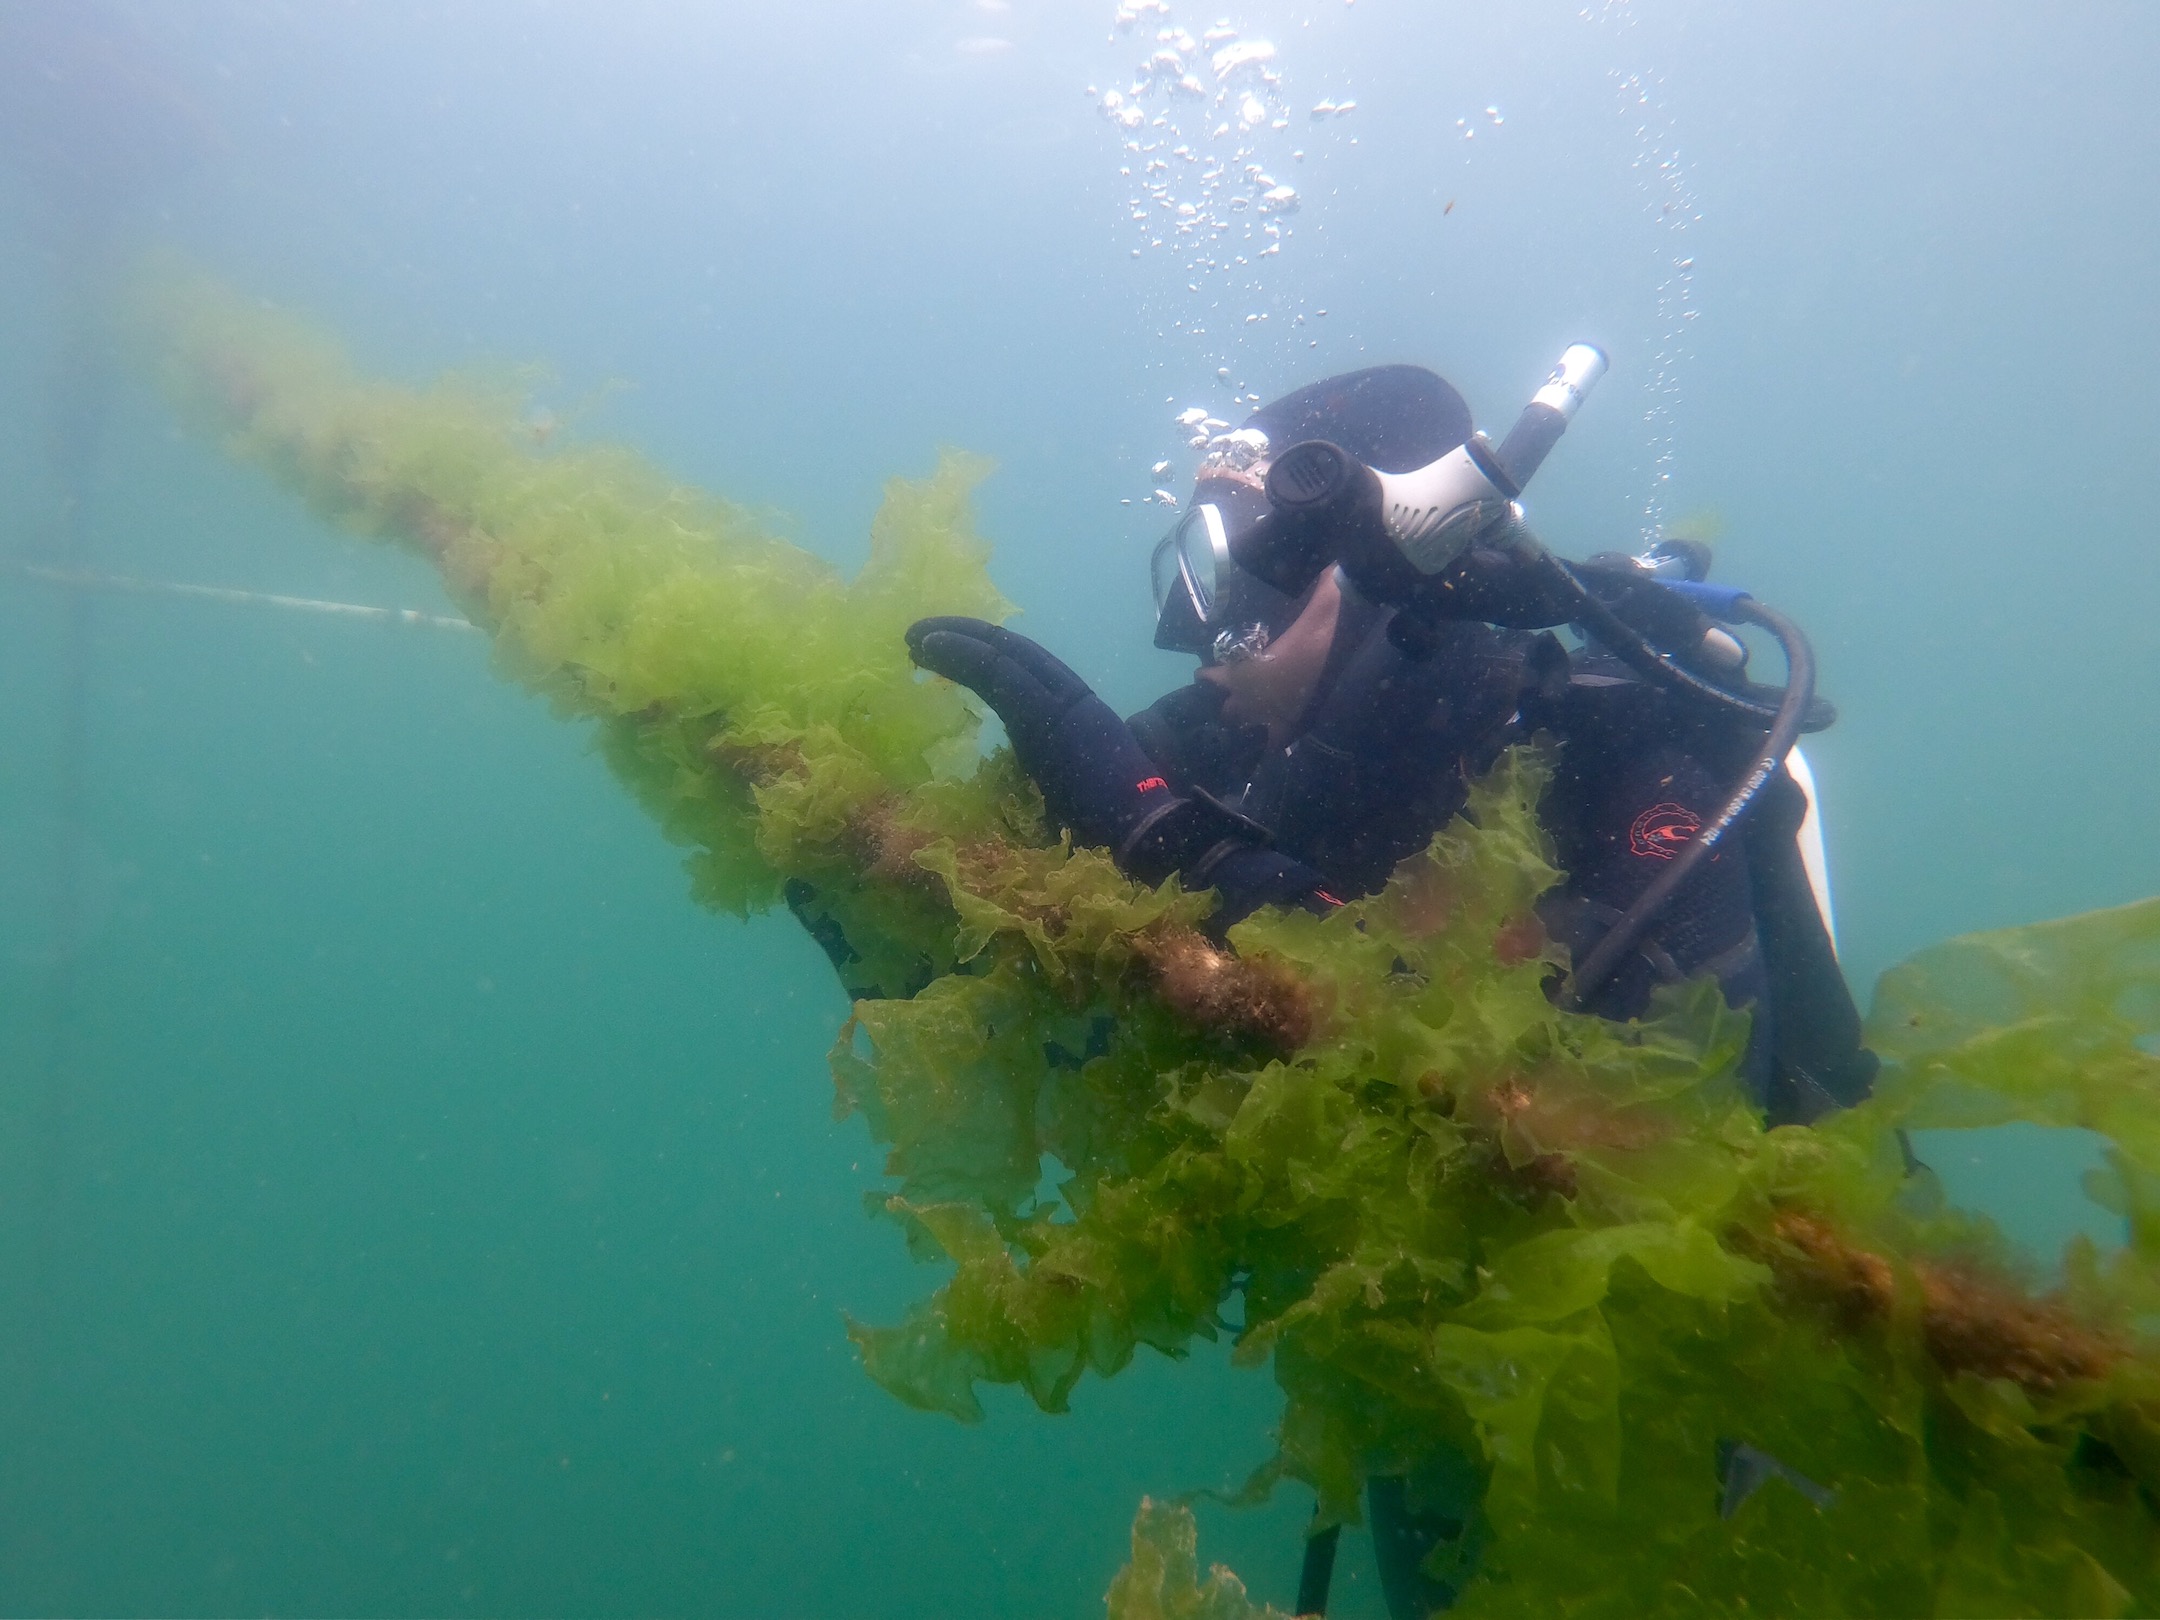 A Sunken Seaweed diver harvests seaweed for commercial use.